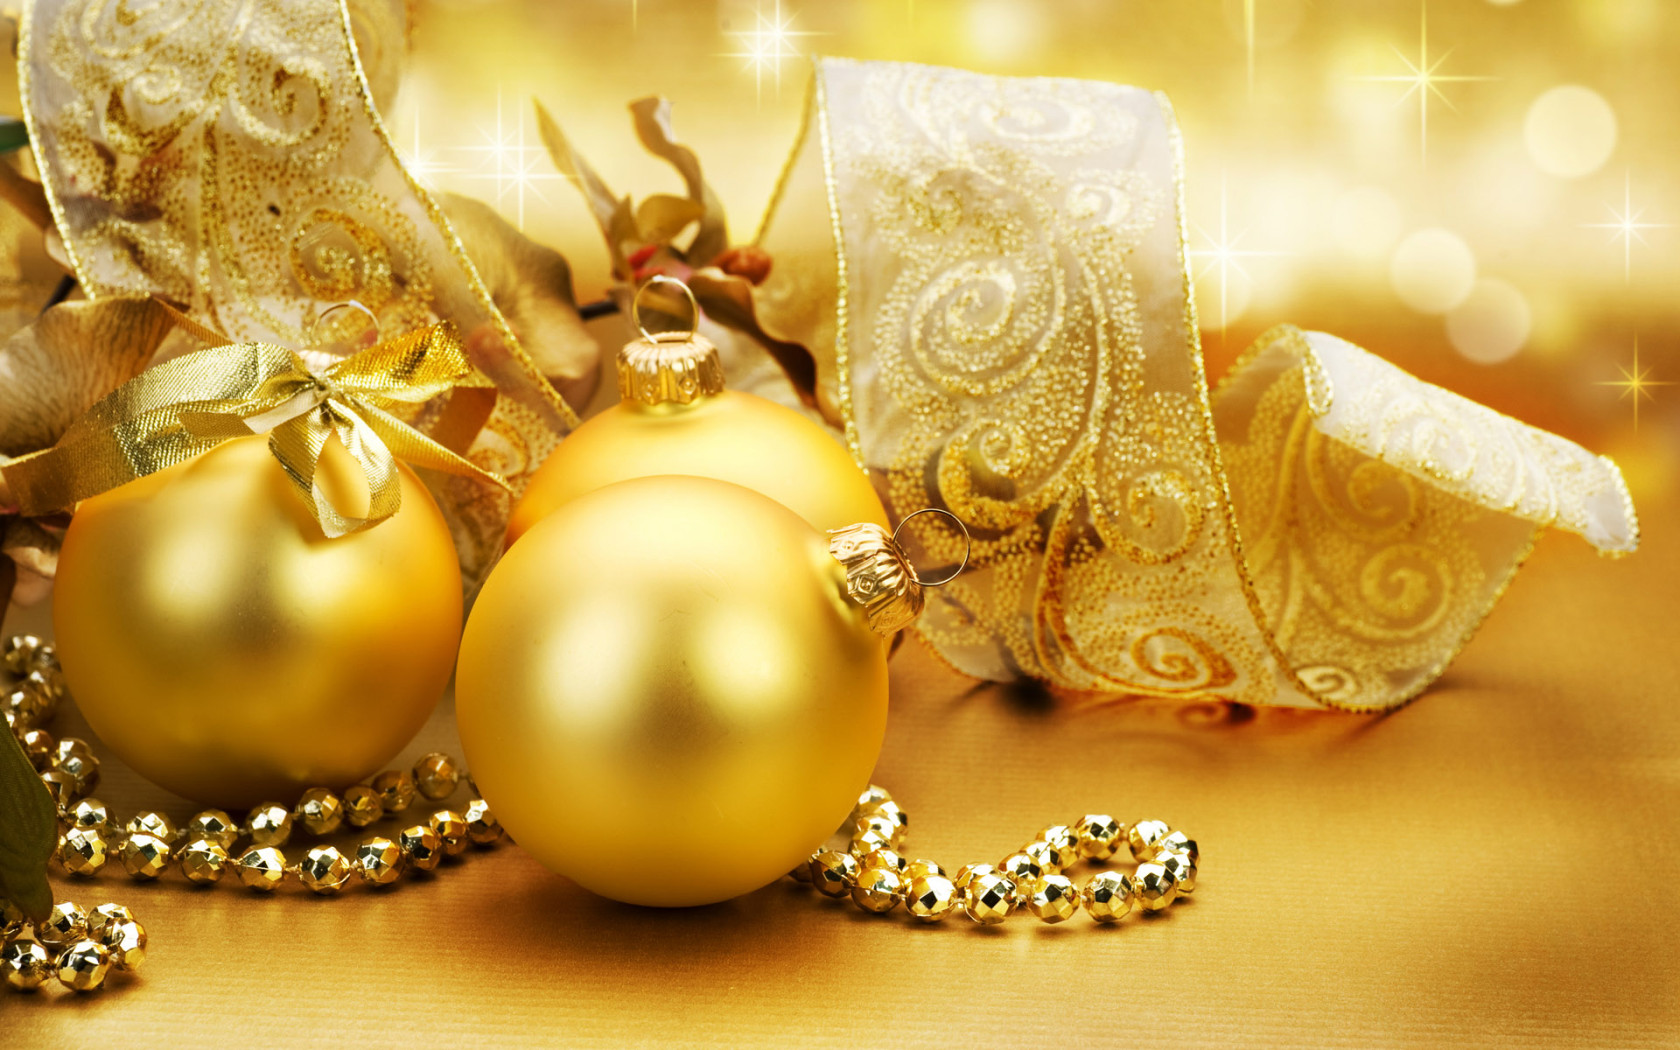 Gold ornaments on the Christmas tree